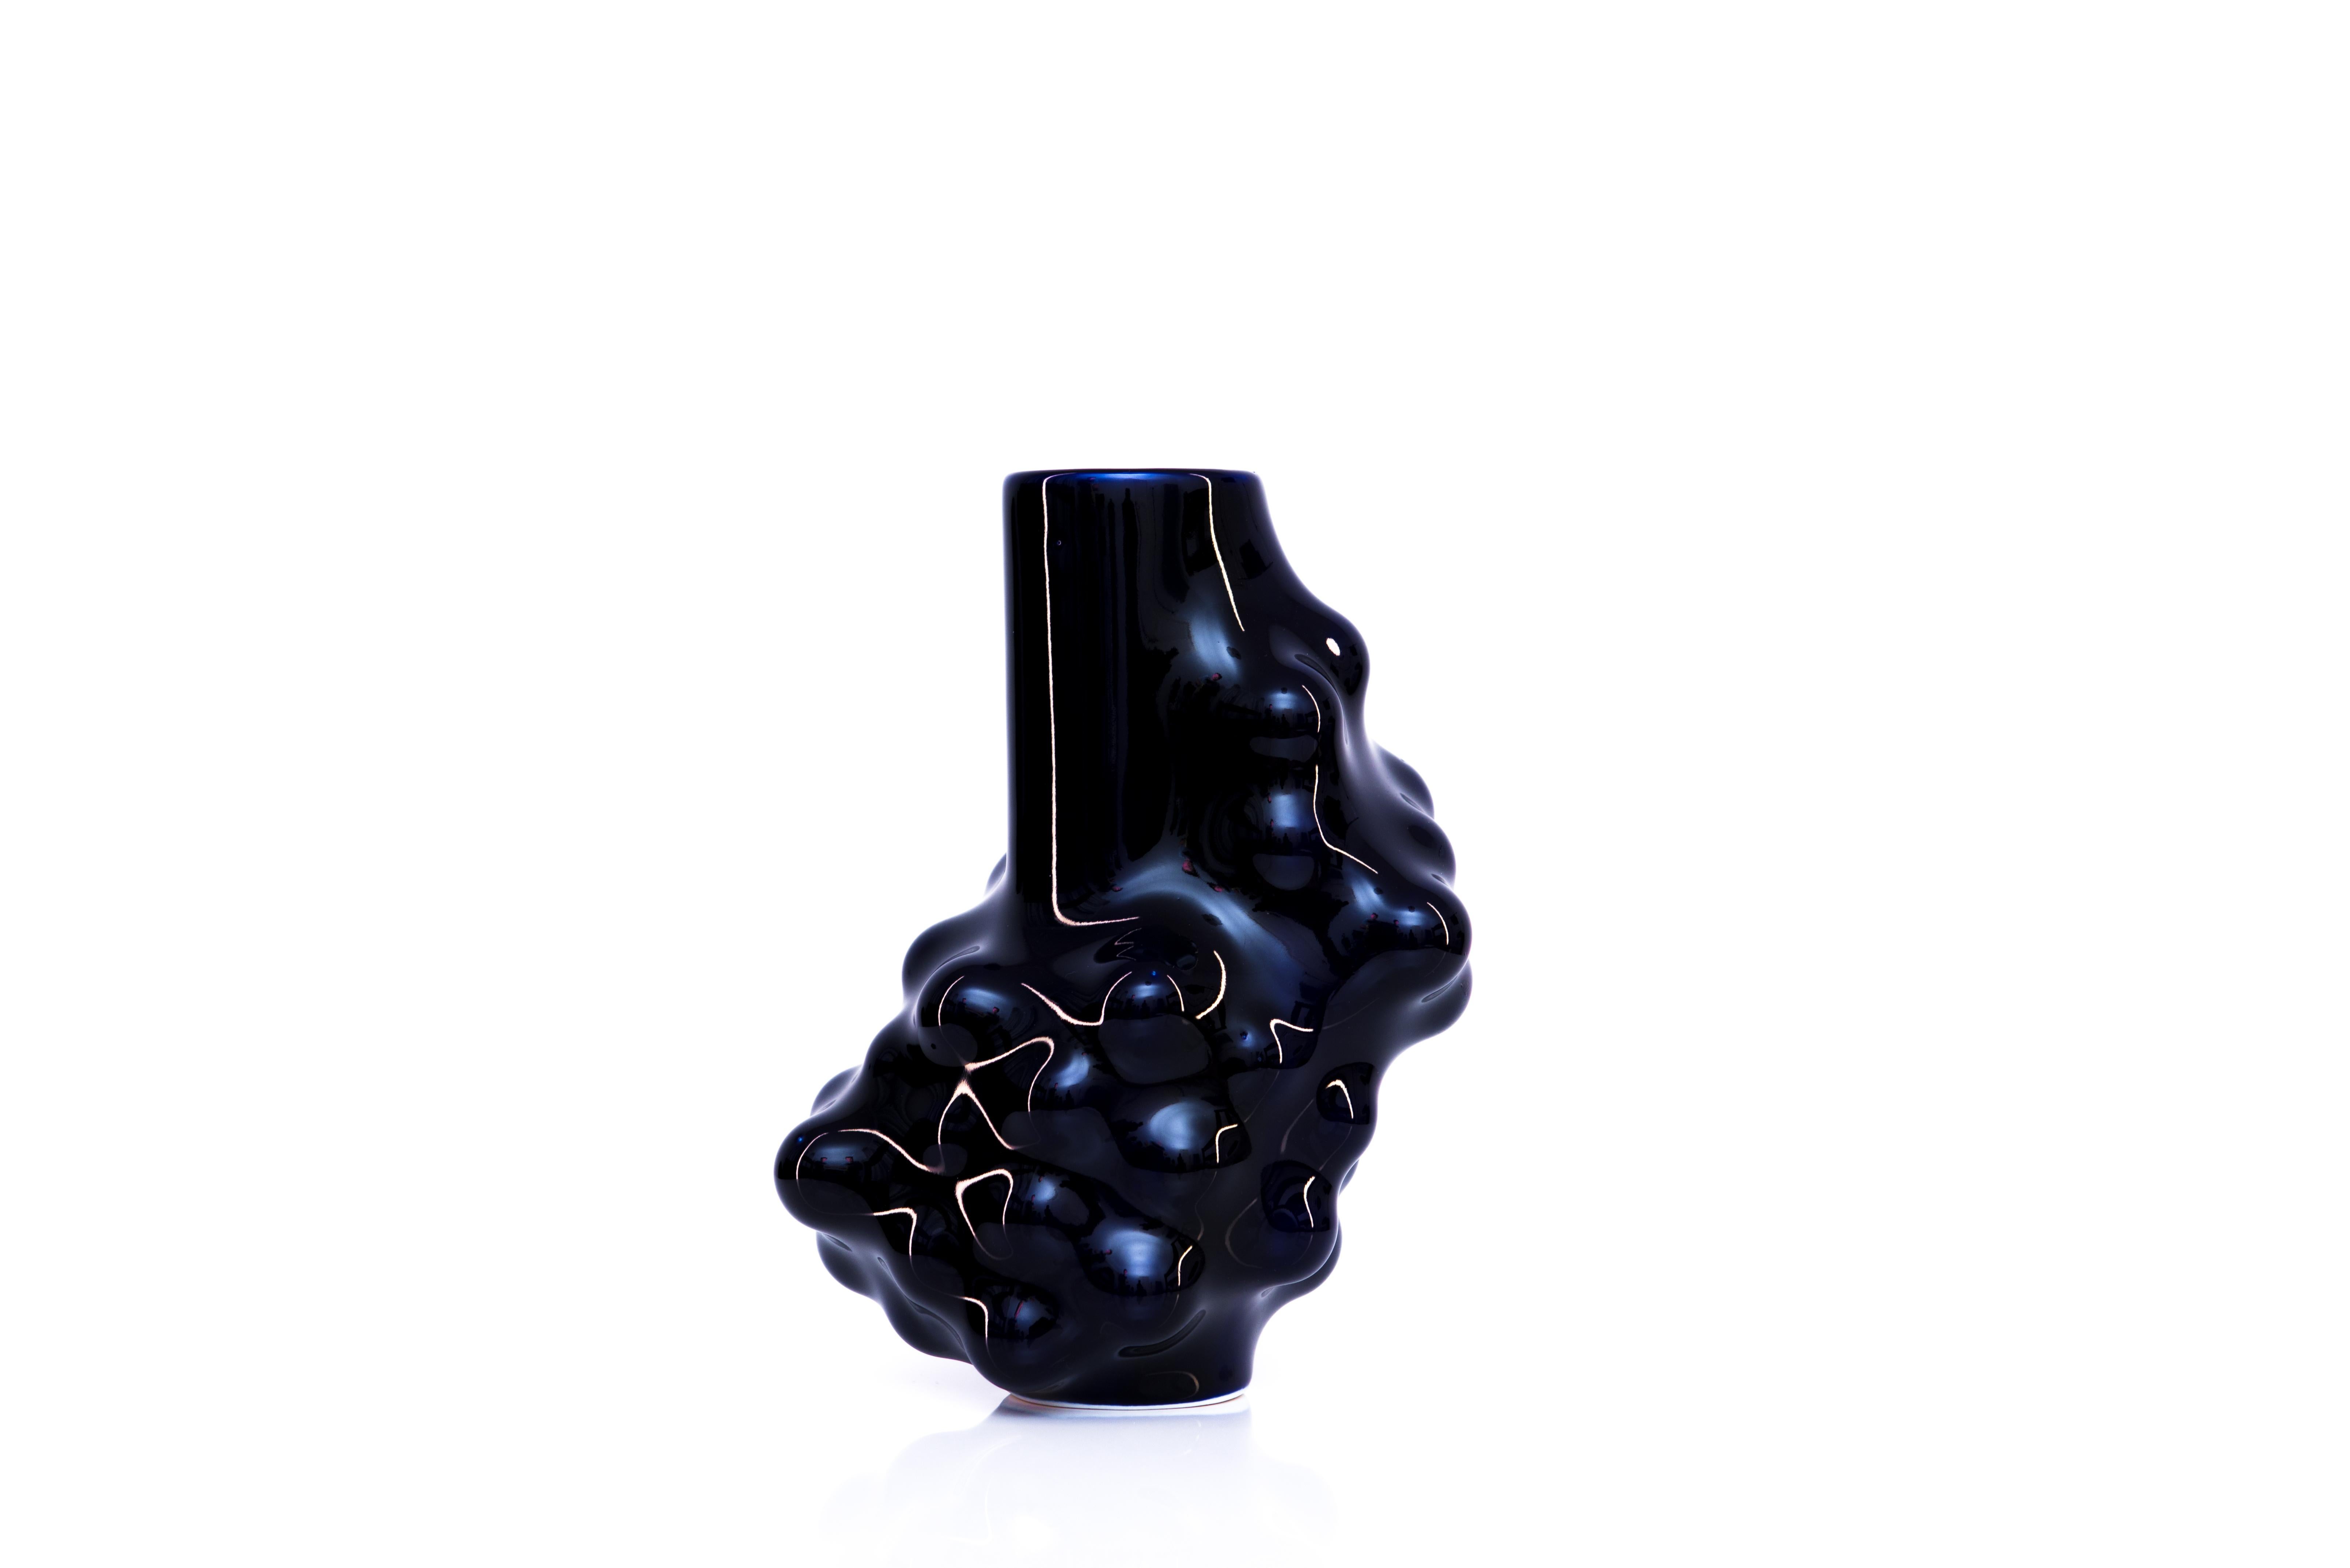 Bumps 2.0 cobalt blue carafe by Arkadiusz Szwed
Dimensions: L 14 x W 13 x H 20 cm
Materials: Porcelain

Arkadiusz Szwed designs and produce ceramic products.
He lives in Warsaw / Poland and work at the School of Form as an Instructor and Head